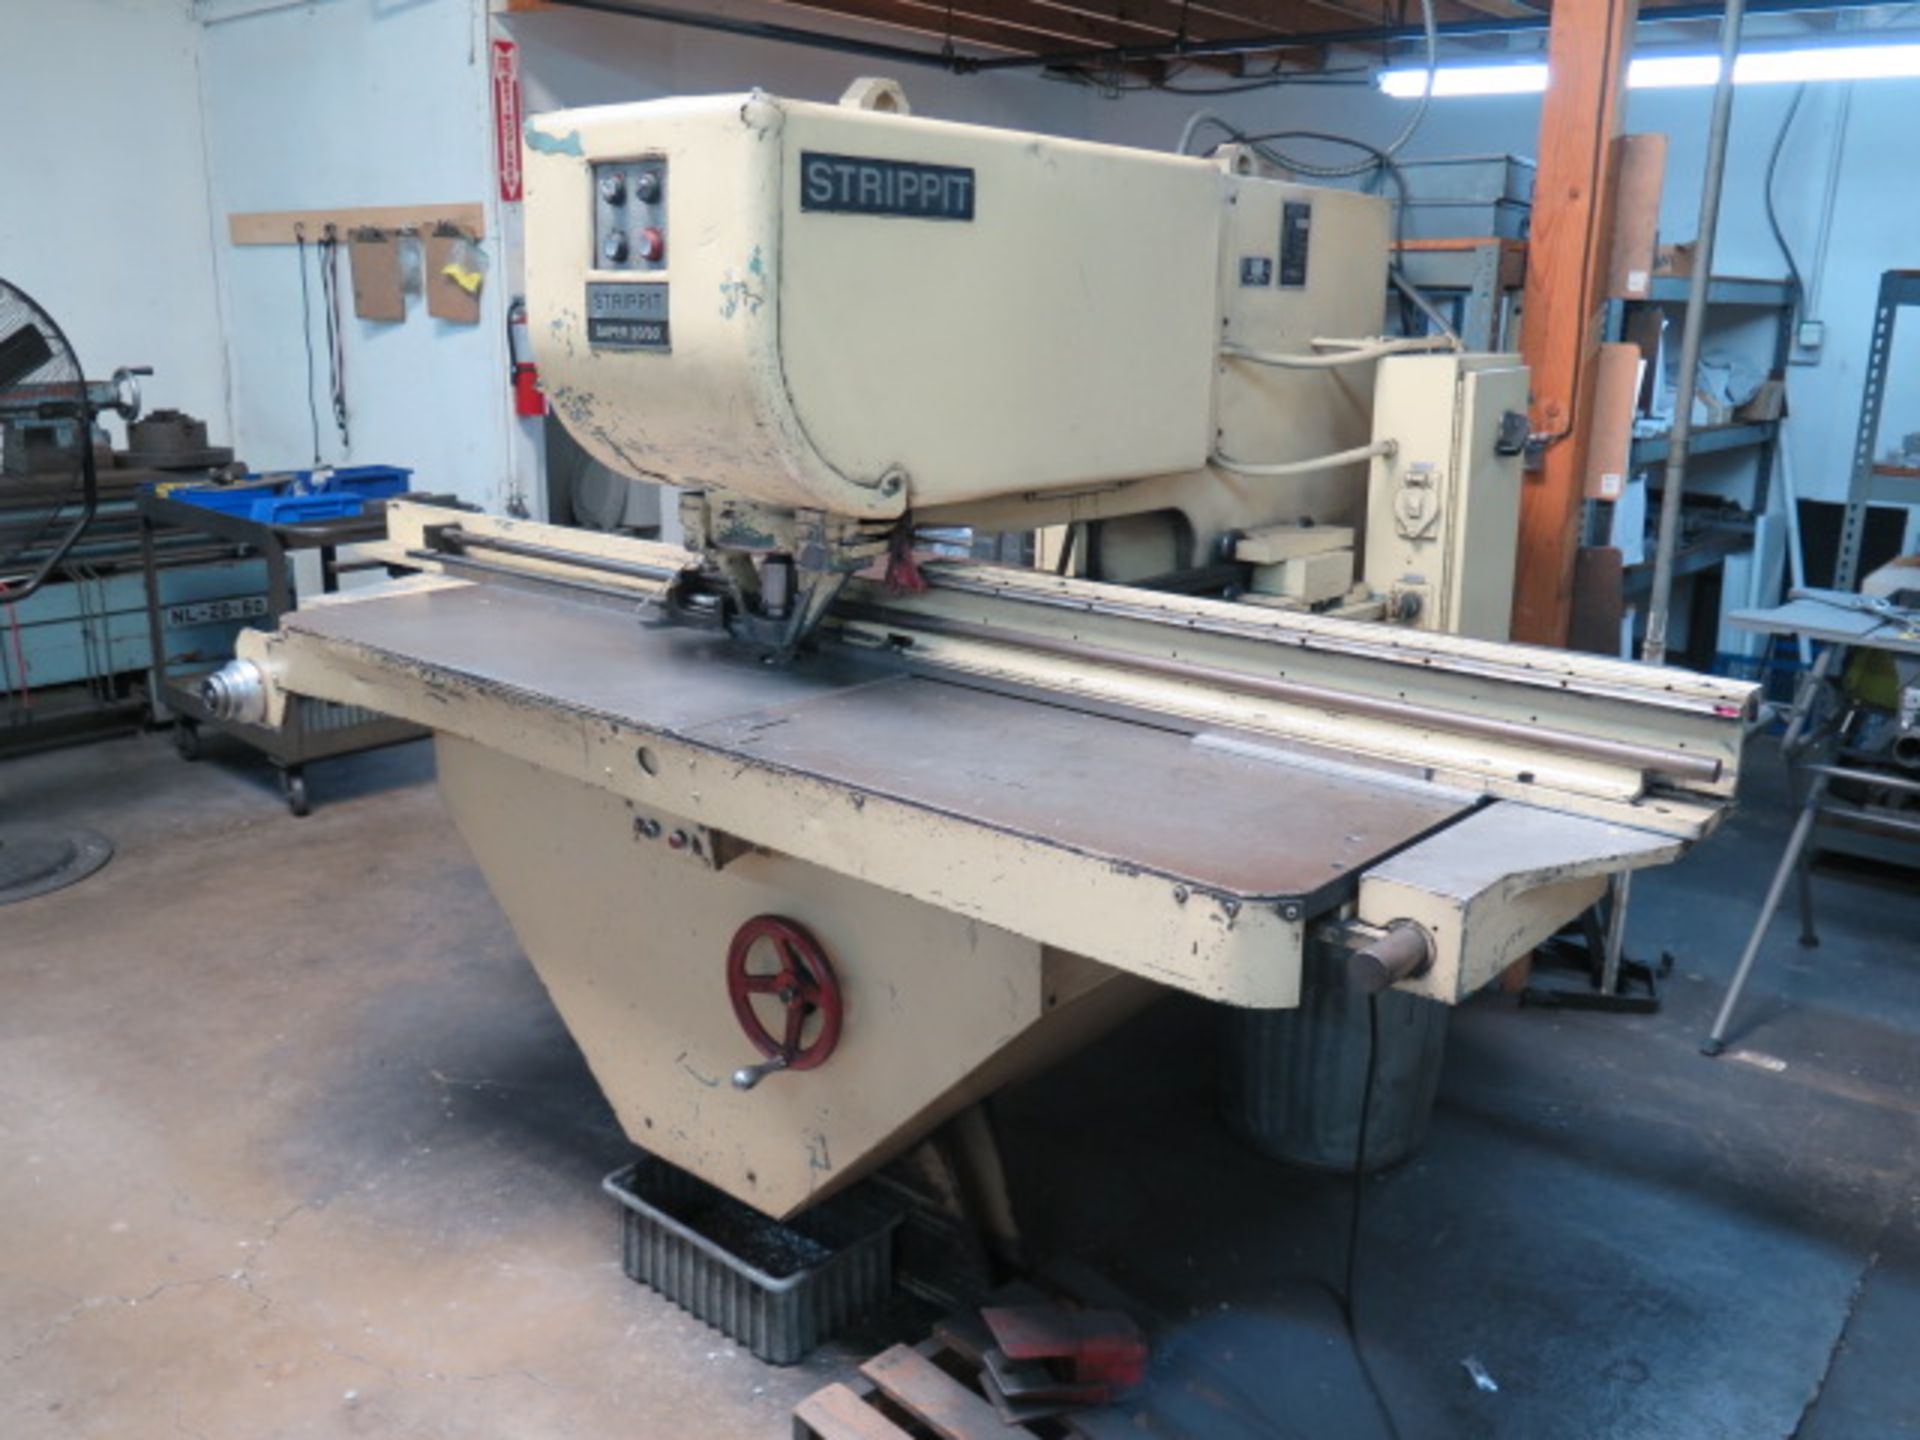 Strippit Super 30/30 Sheet Metal Fabrication Punch Press s/n 1137101270 w/ Fence SOLD AS IS - Image 2 of 19